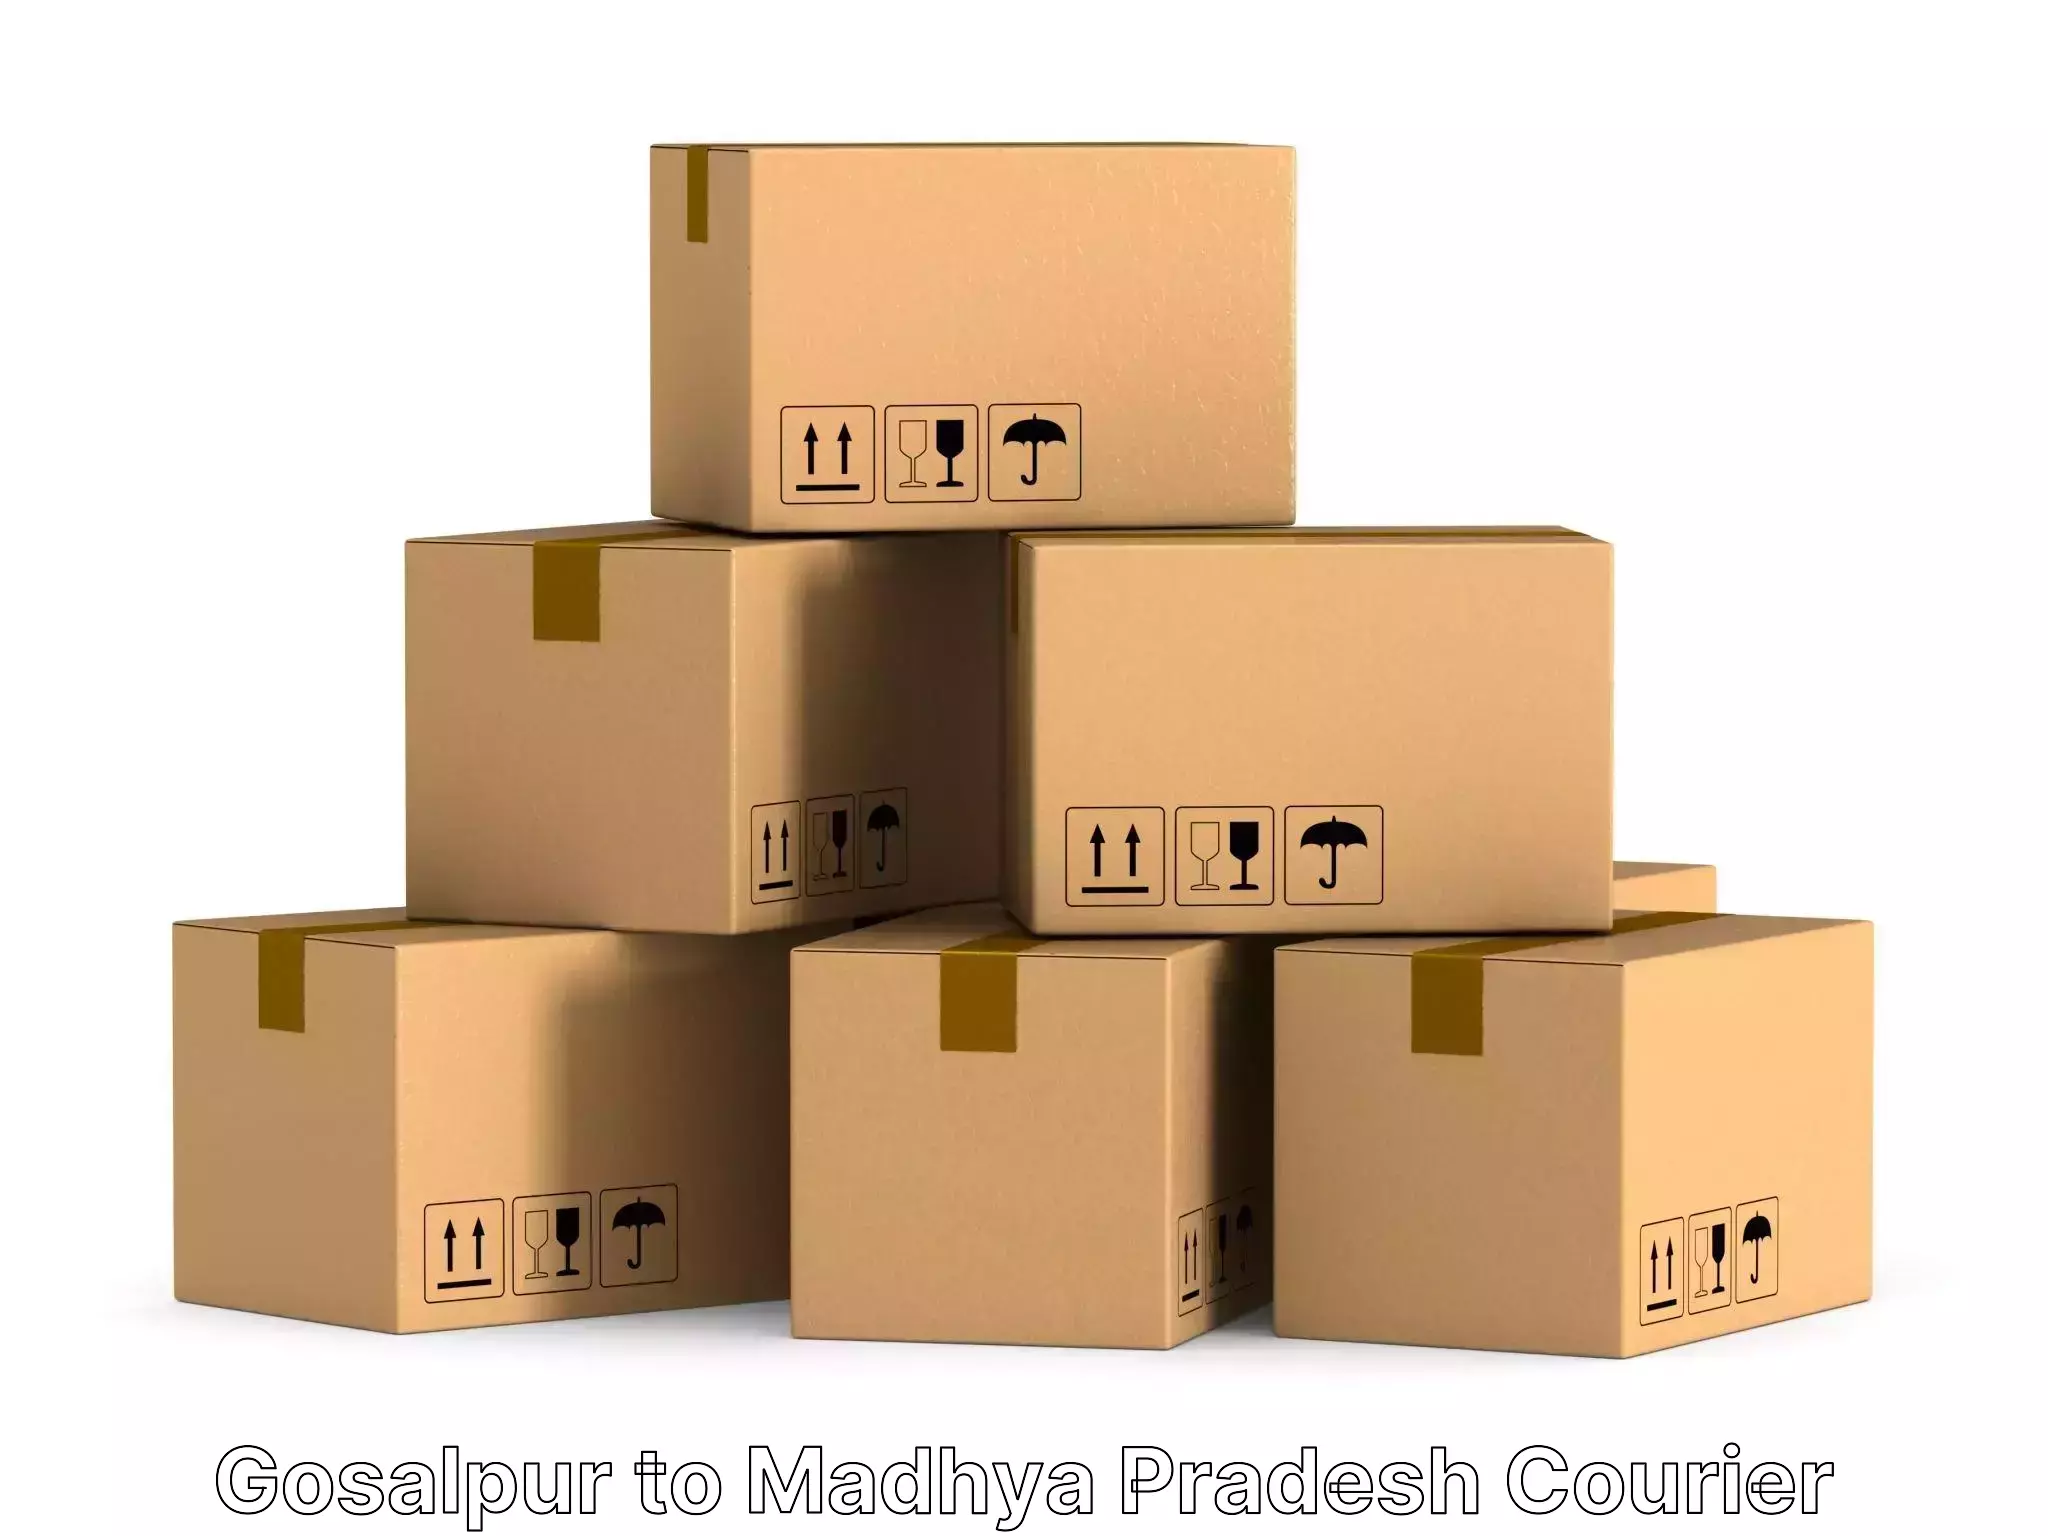 Efficient household movers Gosalpur to Indore